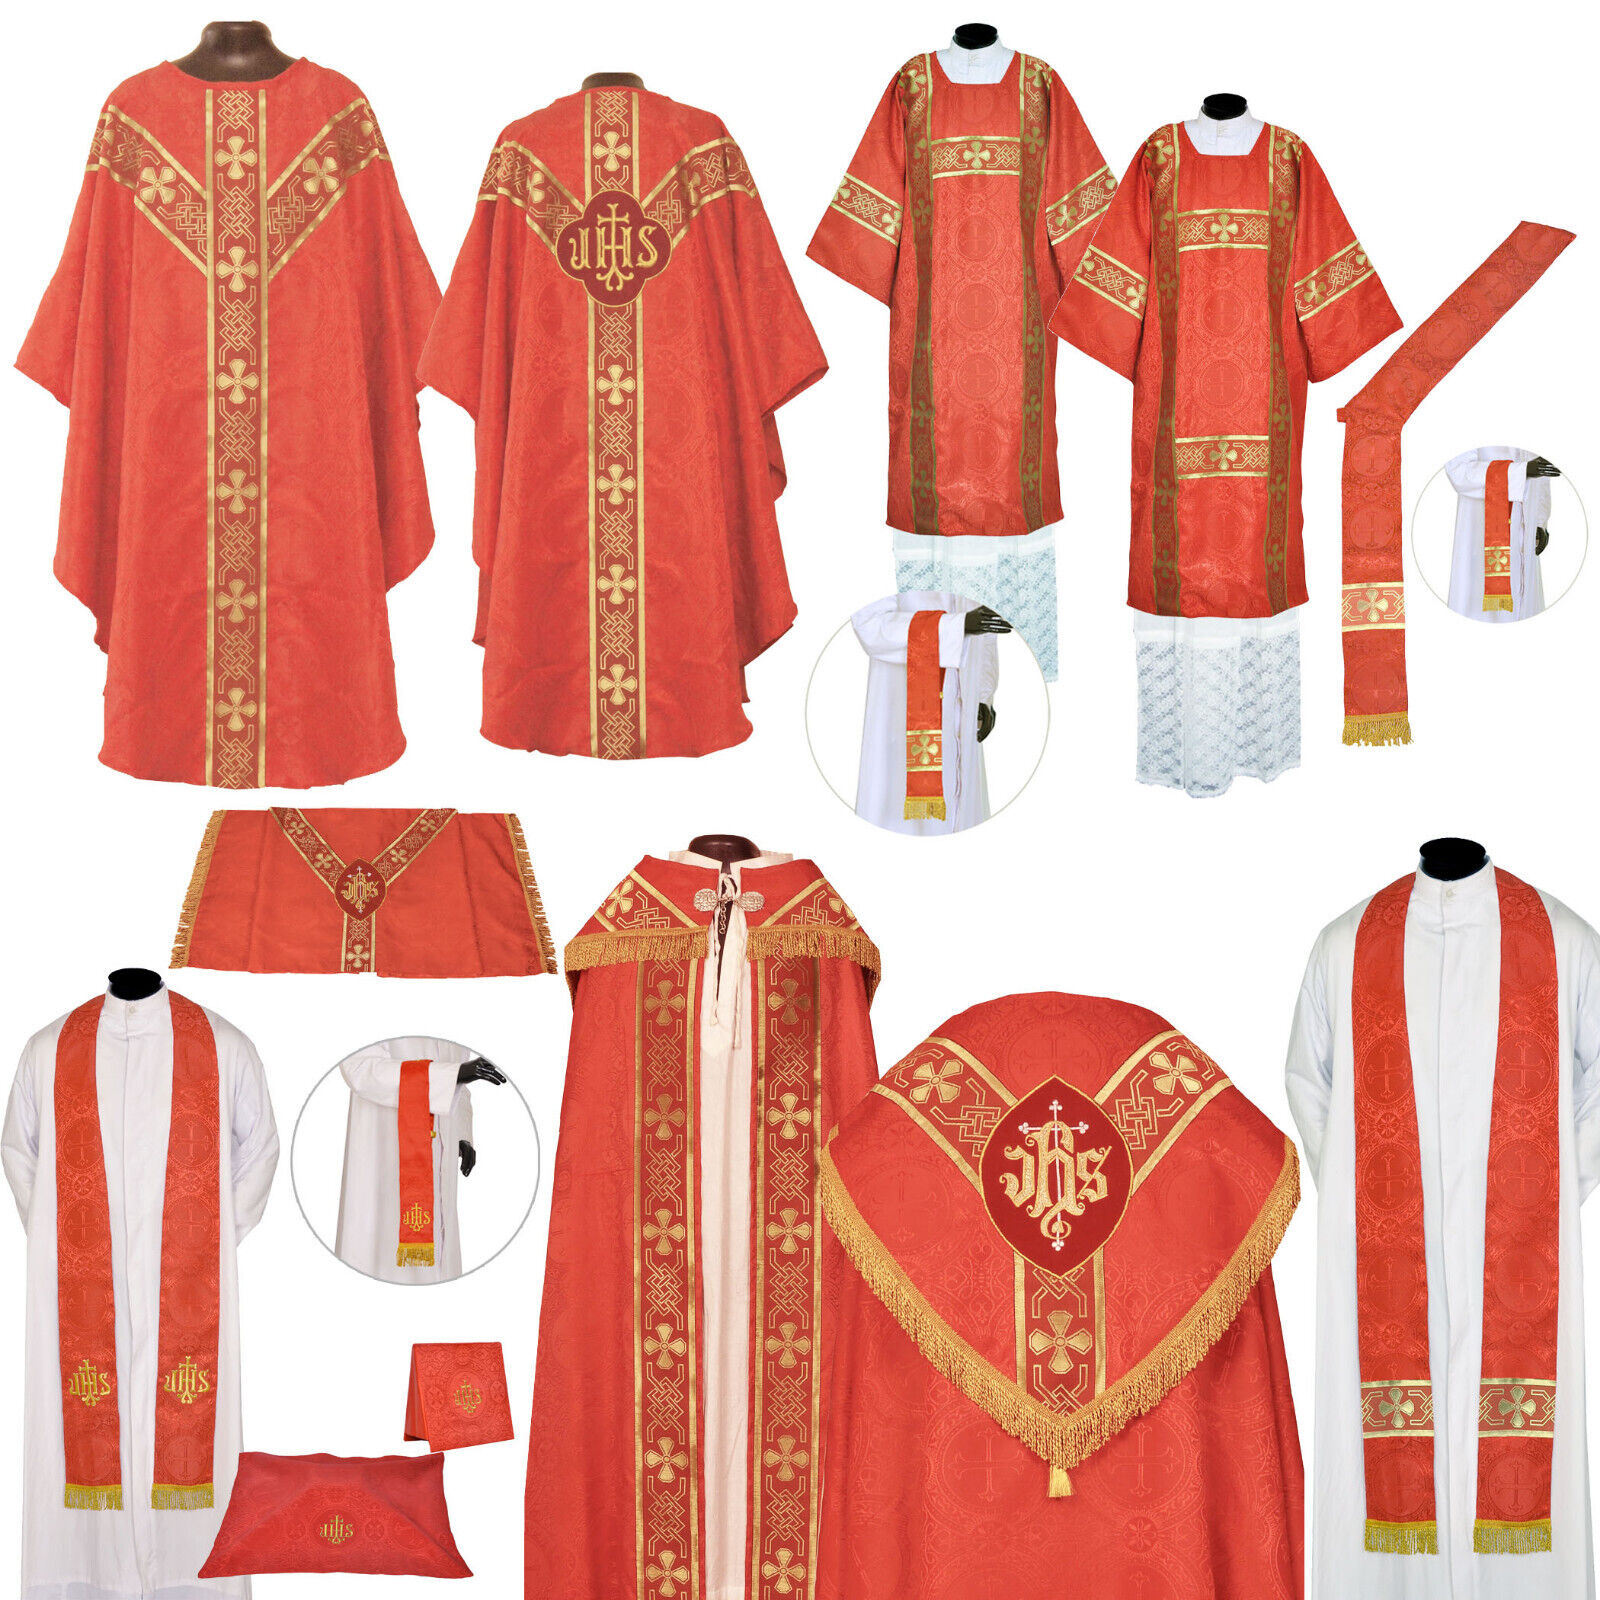 Gothic Red Solemn High Mass Set, New, Chasuble, Dalmatic, Tunicle, Cope, Veil